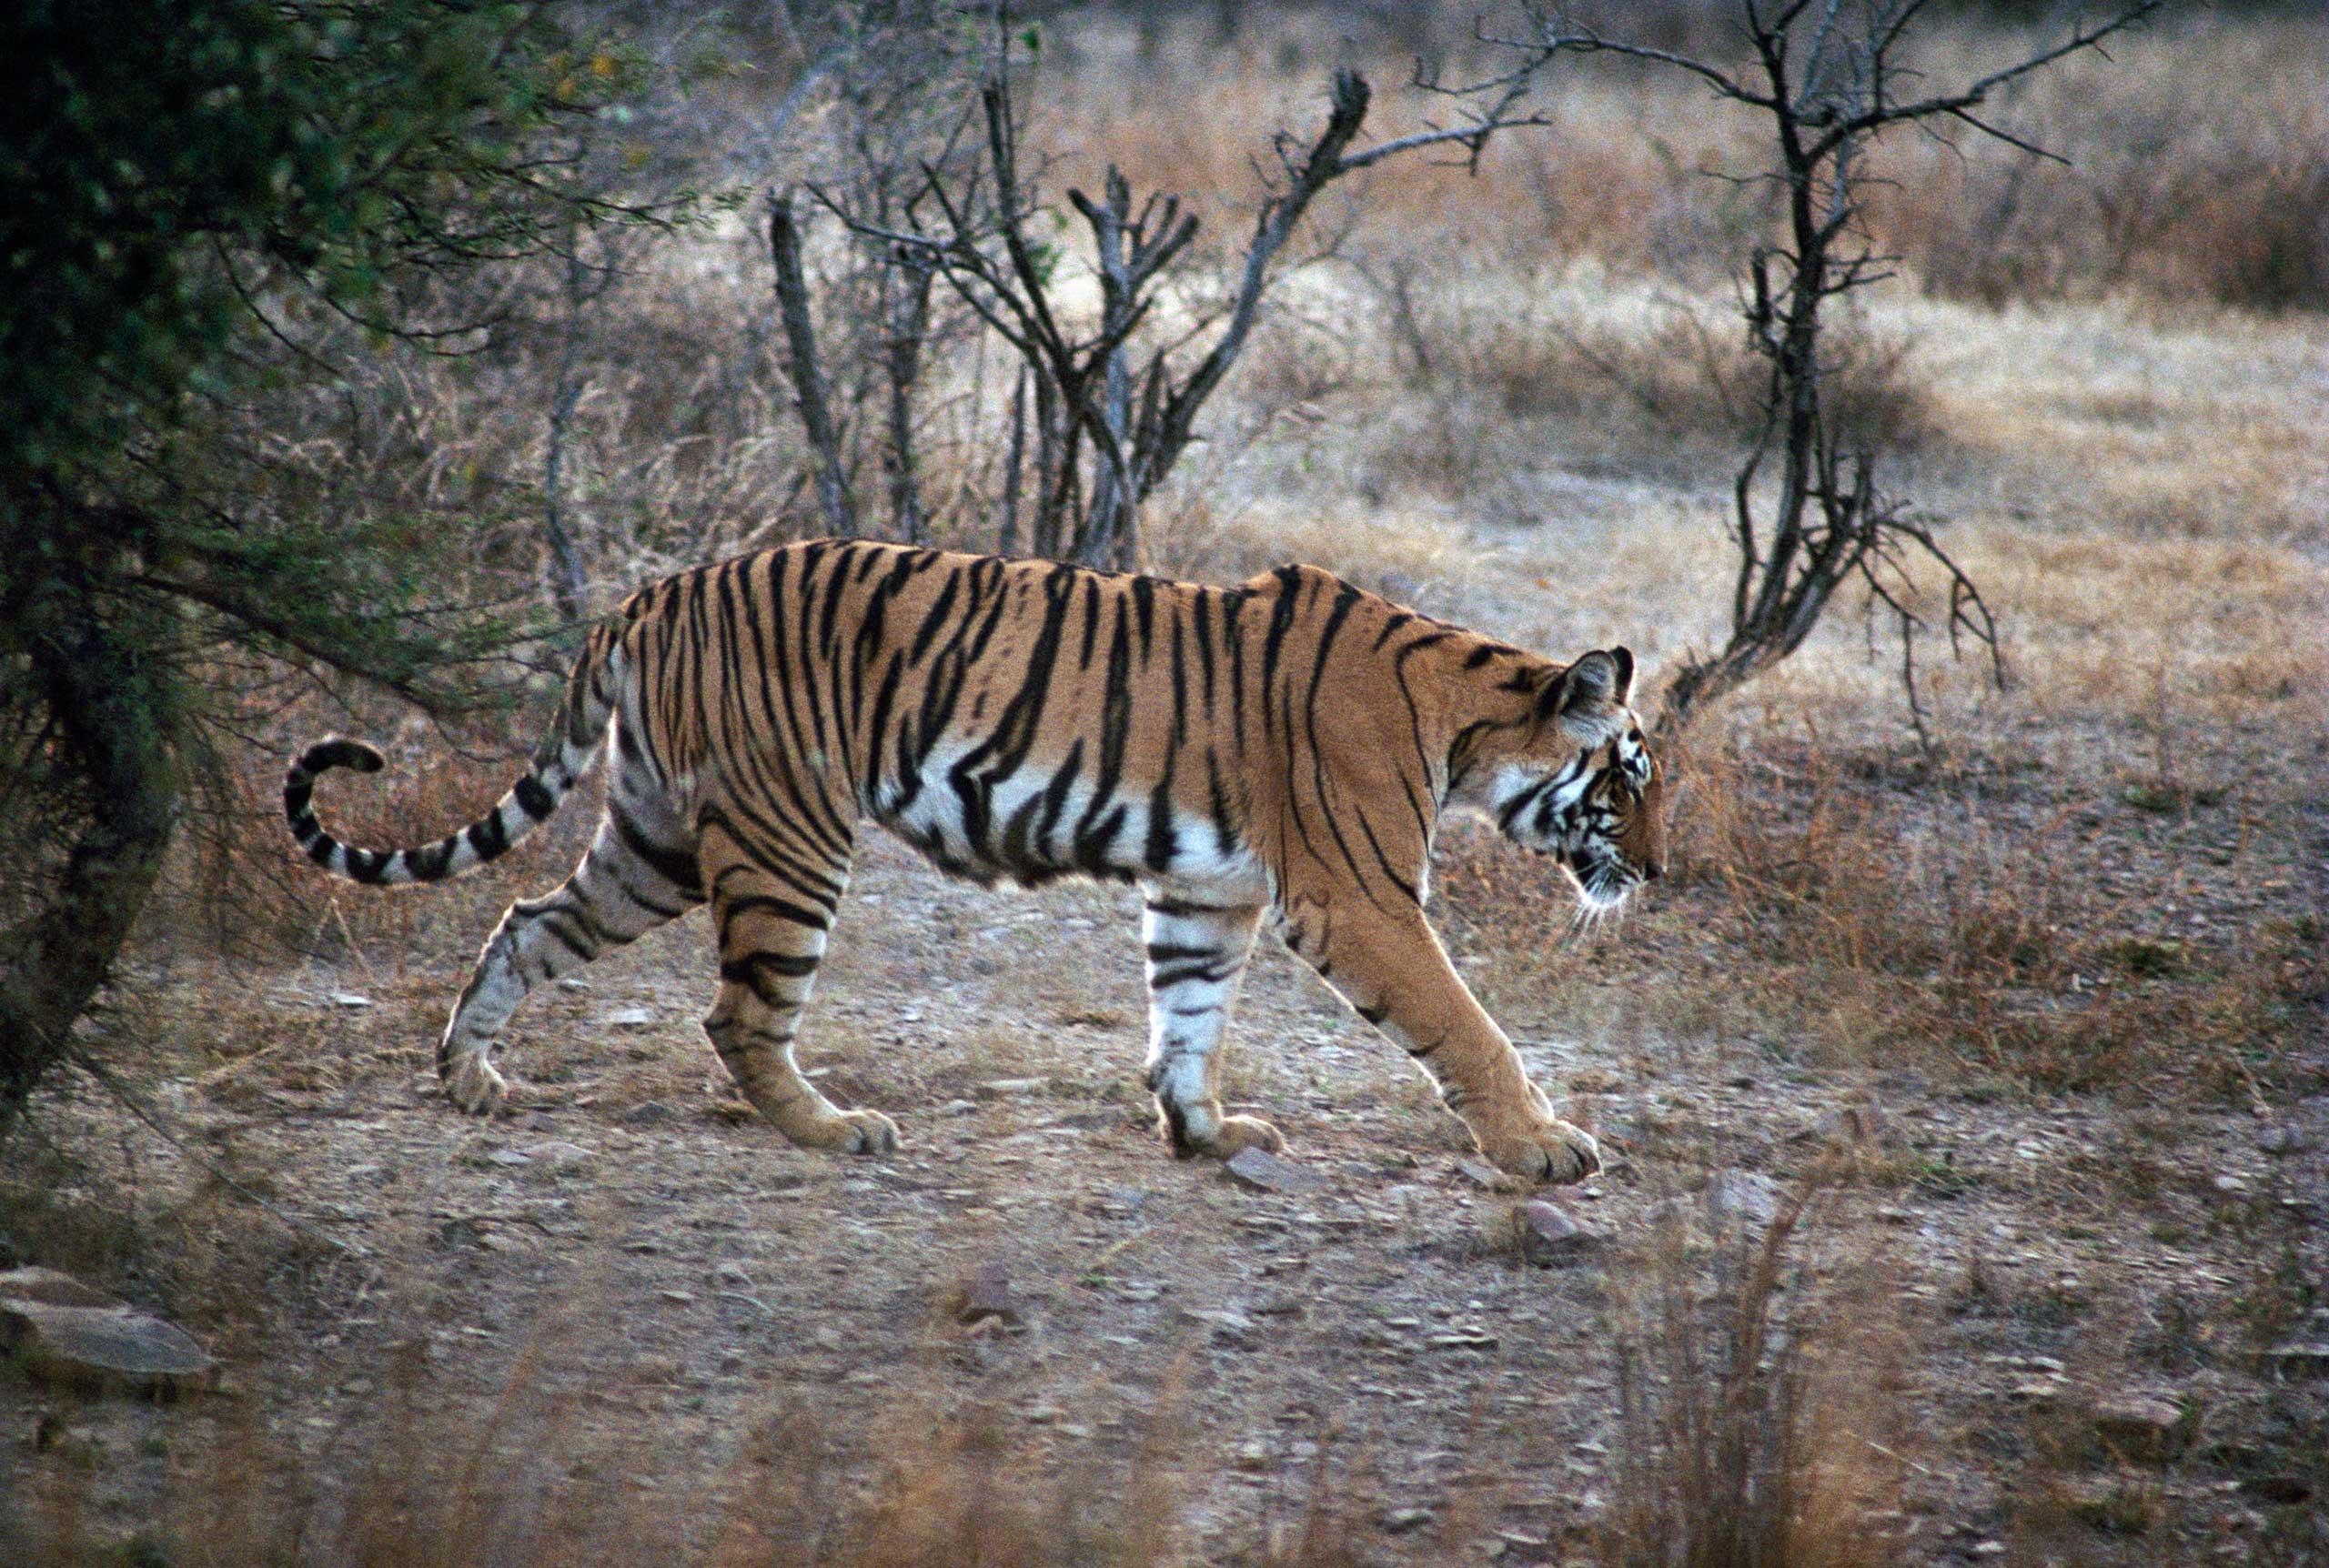 A Bengal tiger at Ranthambore National Park, India, on March 3, 2014 (De Agostini/Getty Images)